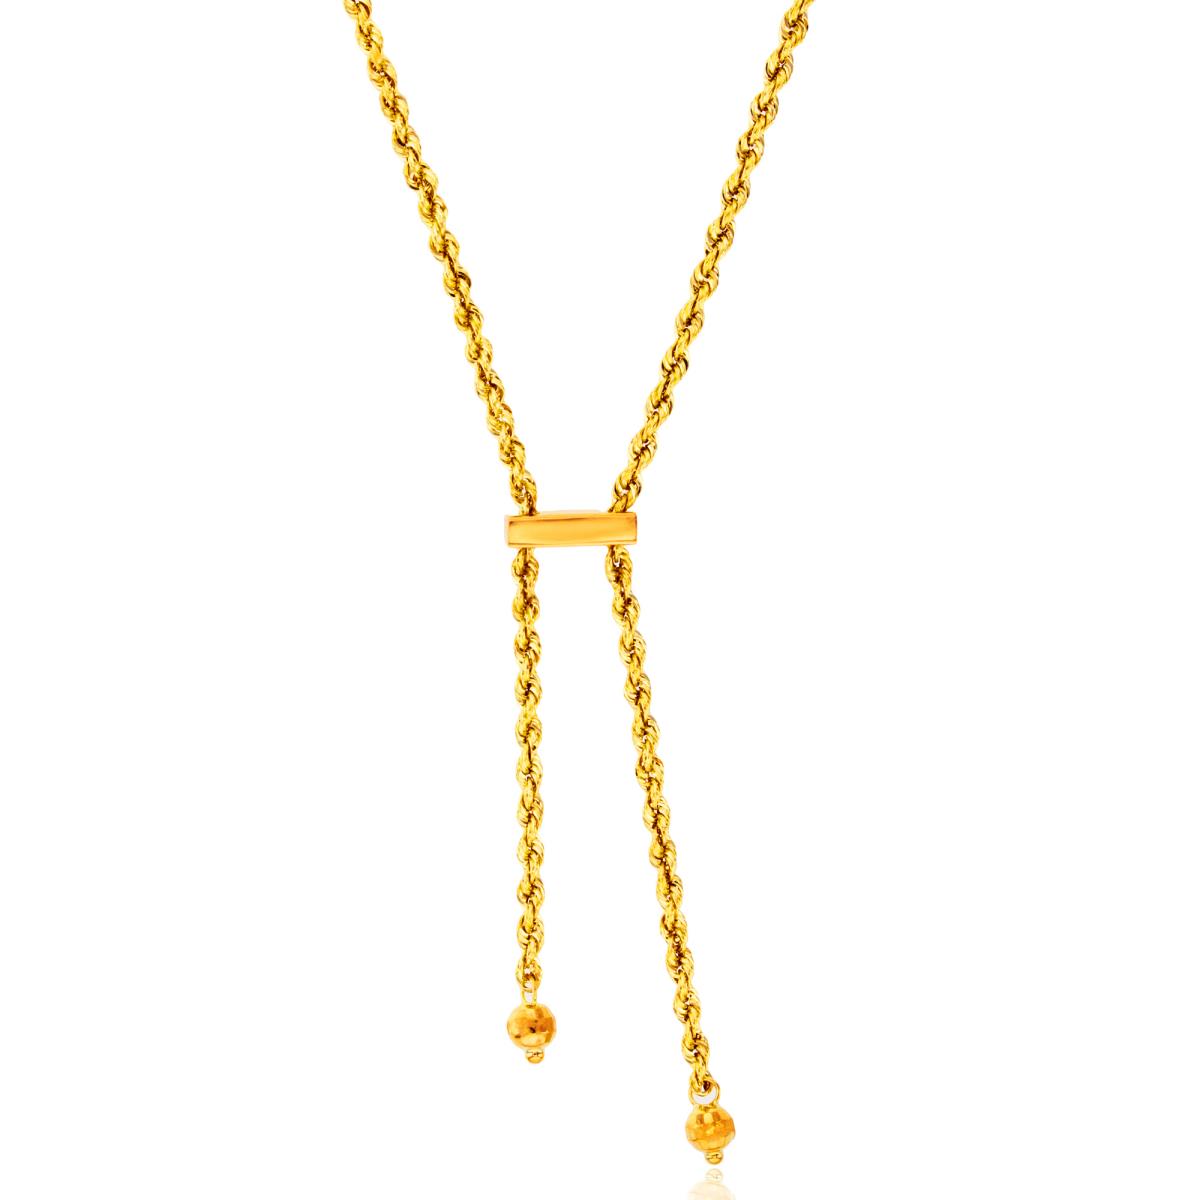 14K Yellow Gold 2.25mm DC Rope Dangling Bar/Beads 17" "Y" Necklace